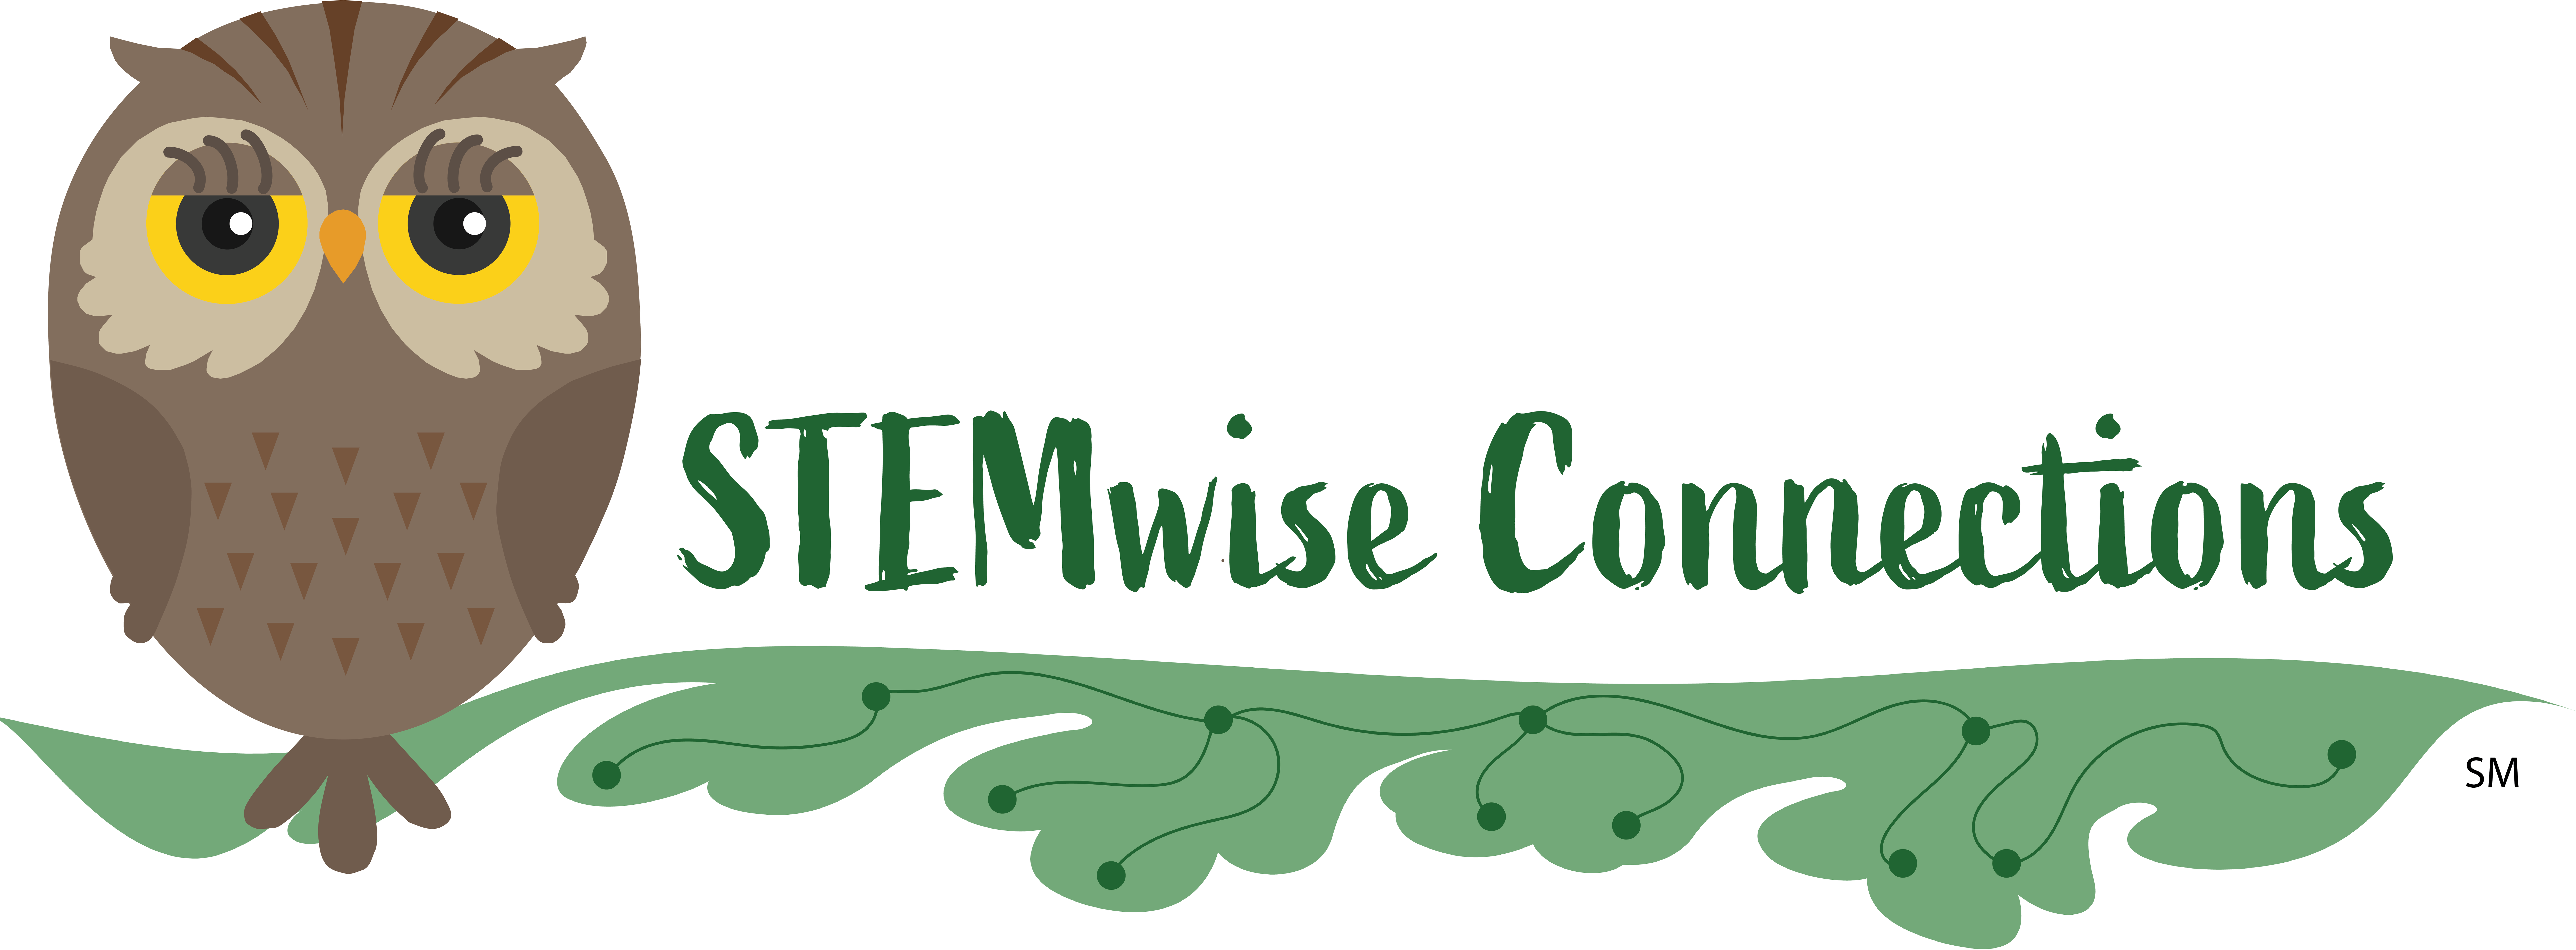 STEMwise Connections Logo - Brown owl with words STEMwise Connections sitting on top of green leaf with connector lines throughout